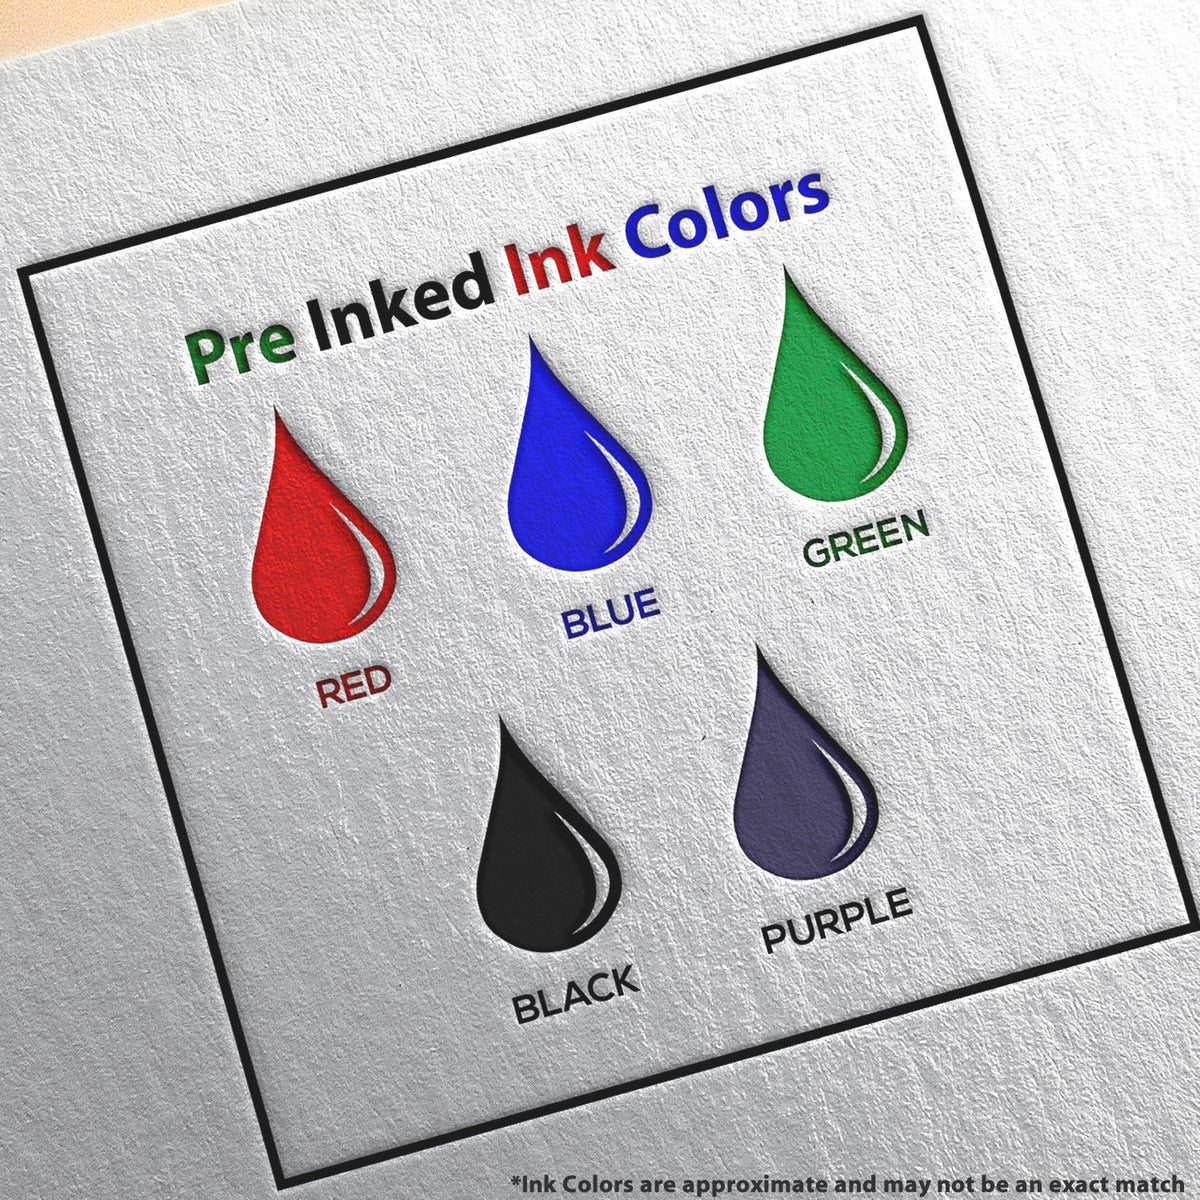 A picture showing the different ink colors or hues available for the PSI New York Notary Stamp product.